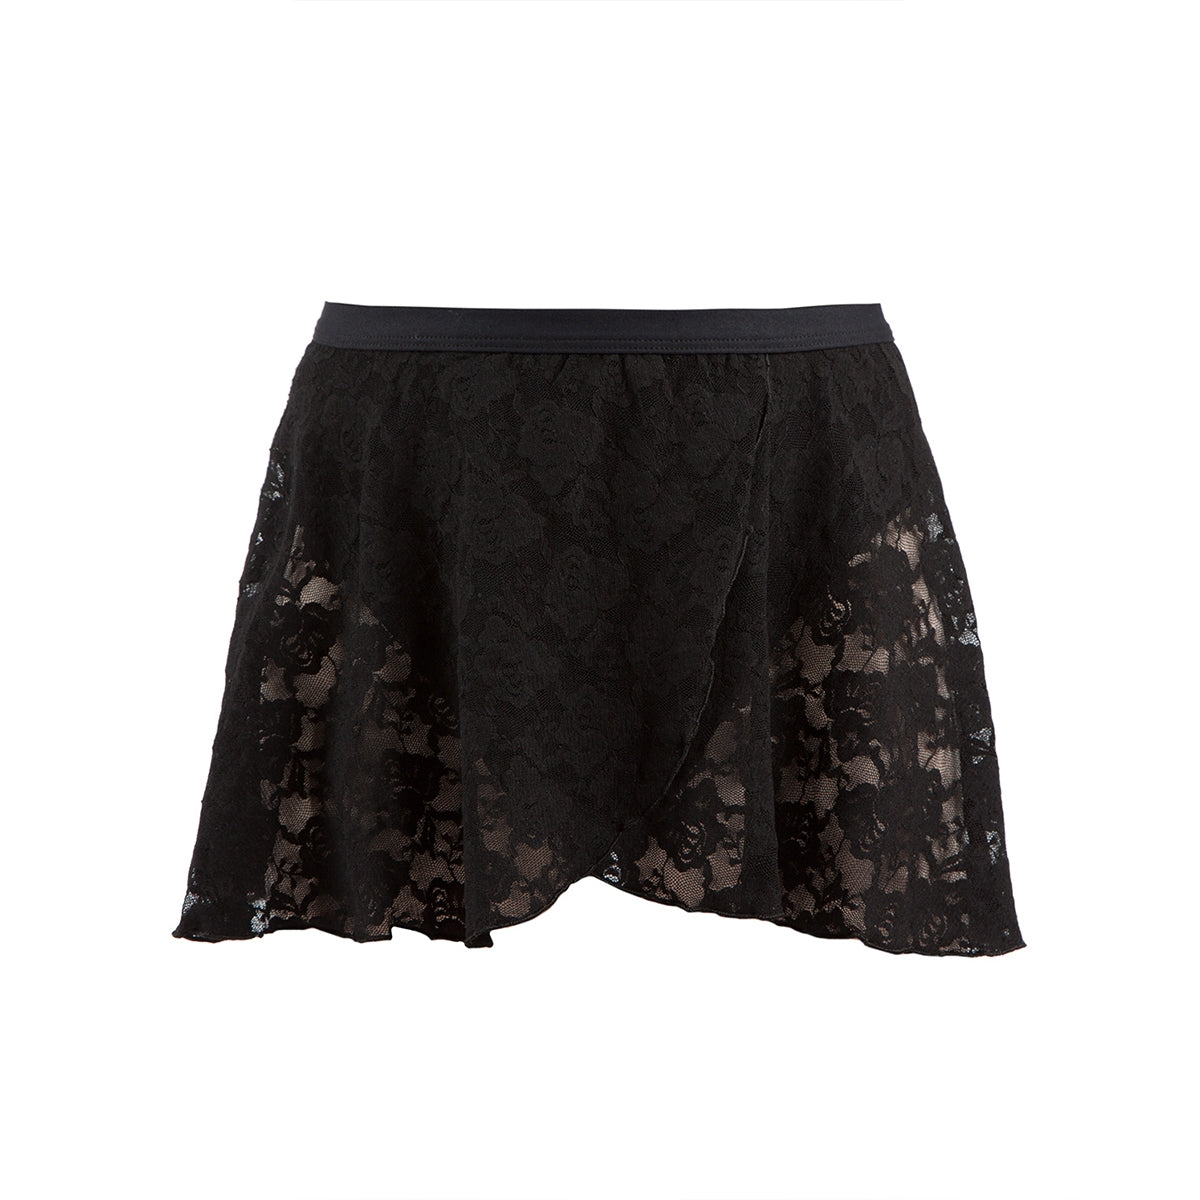 Melody Lace Skirt - Adult